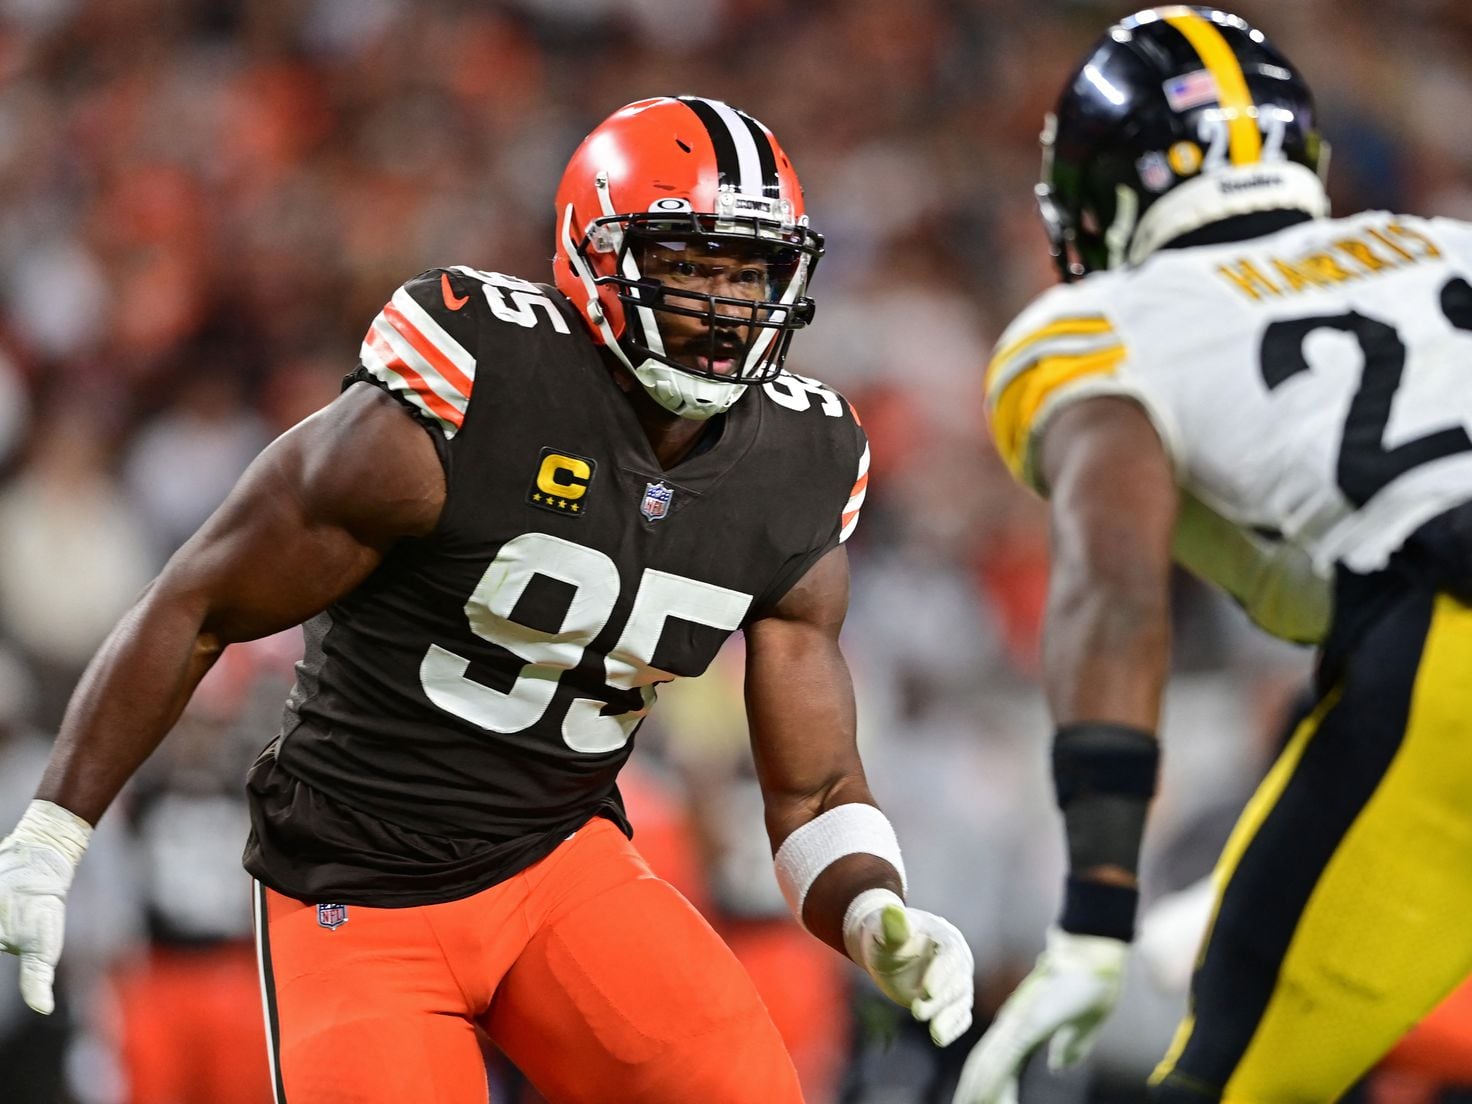 Browns vs Steelers odds and predictions: Who is the favorite in the NFL  Monday Night game? - AS USA